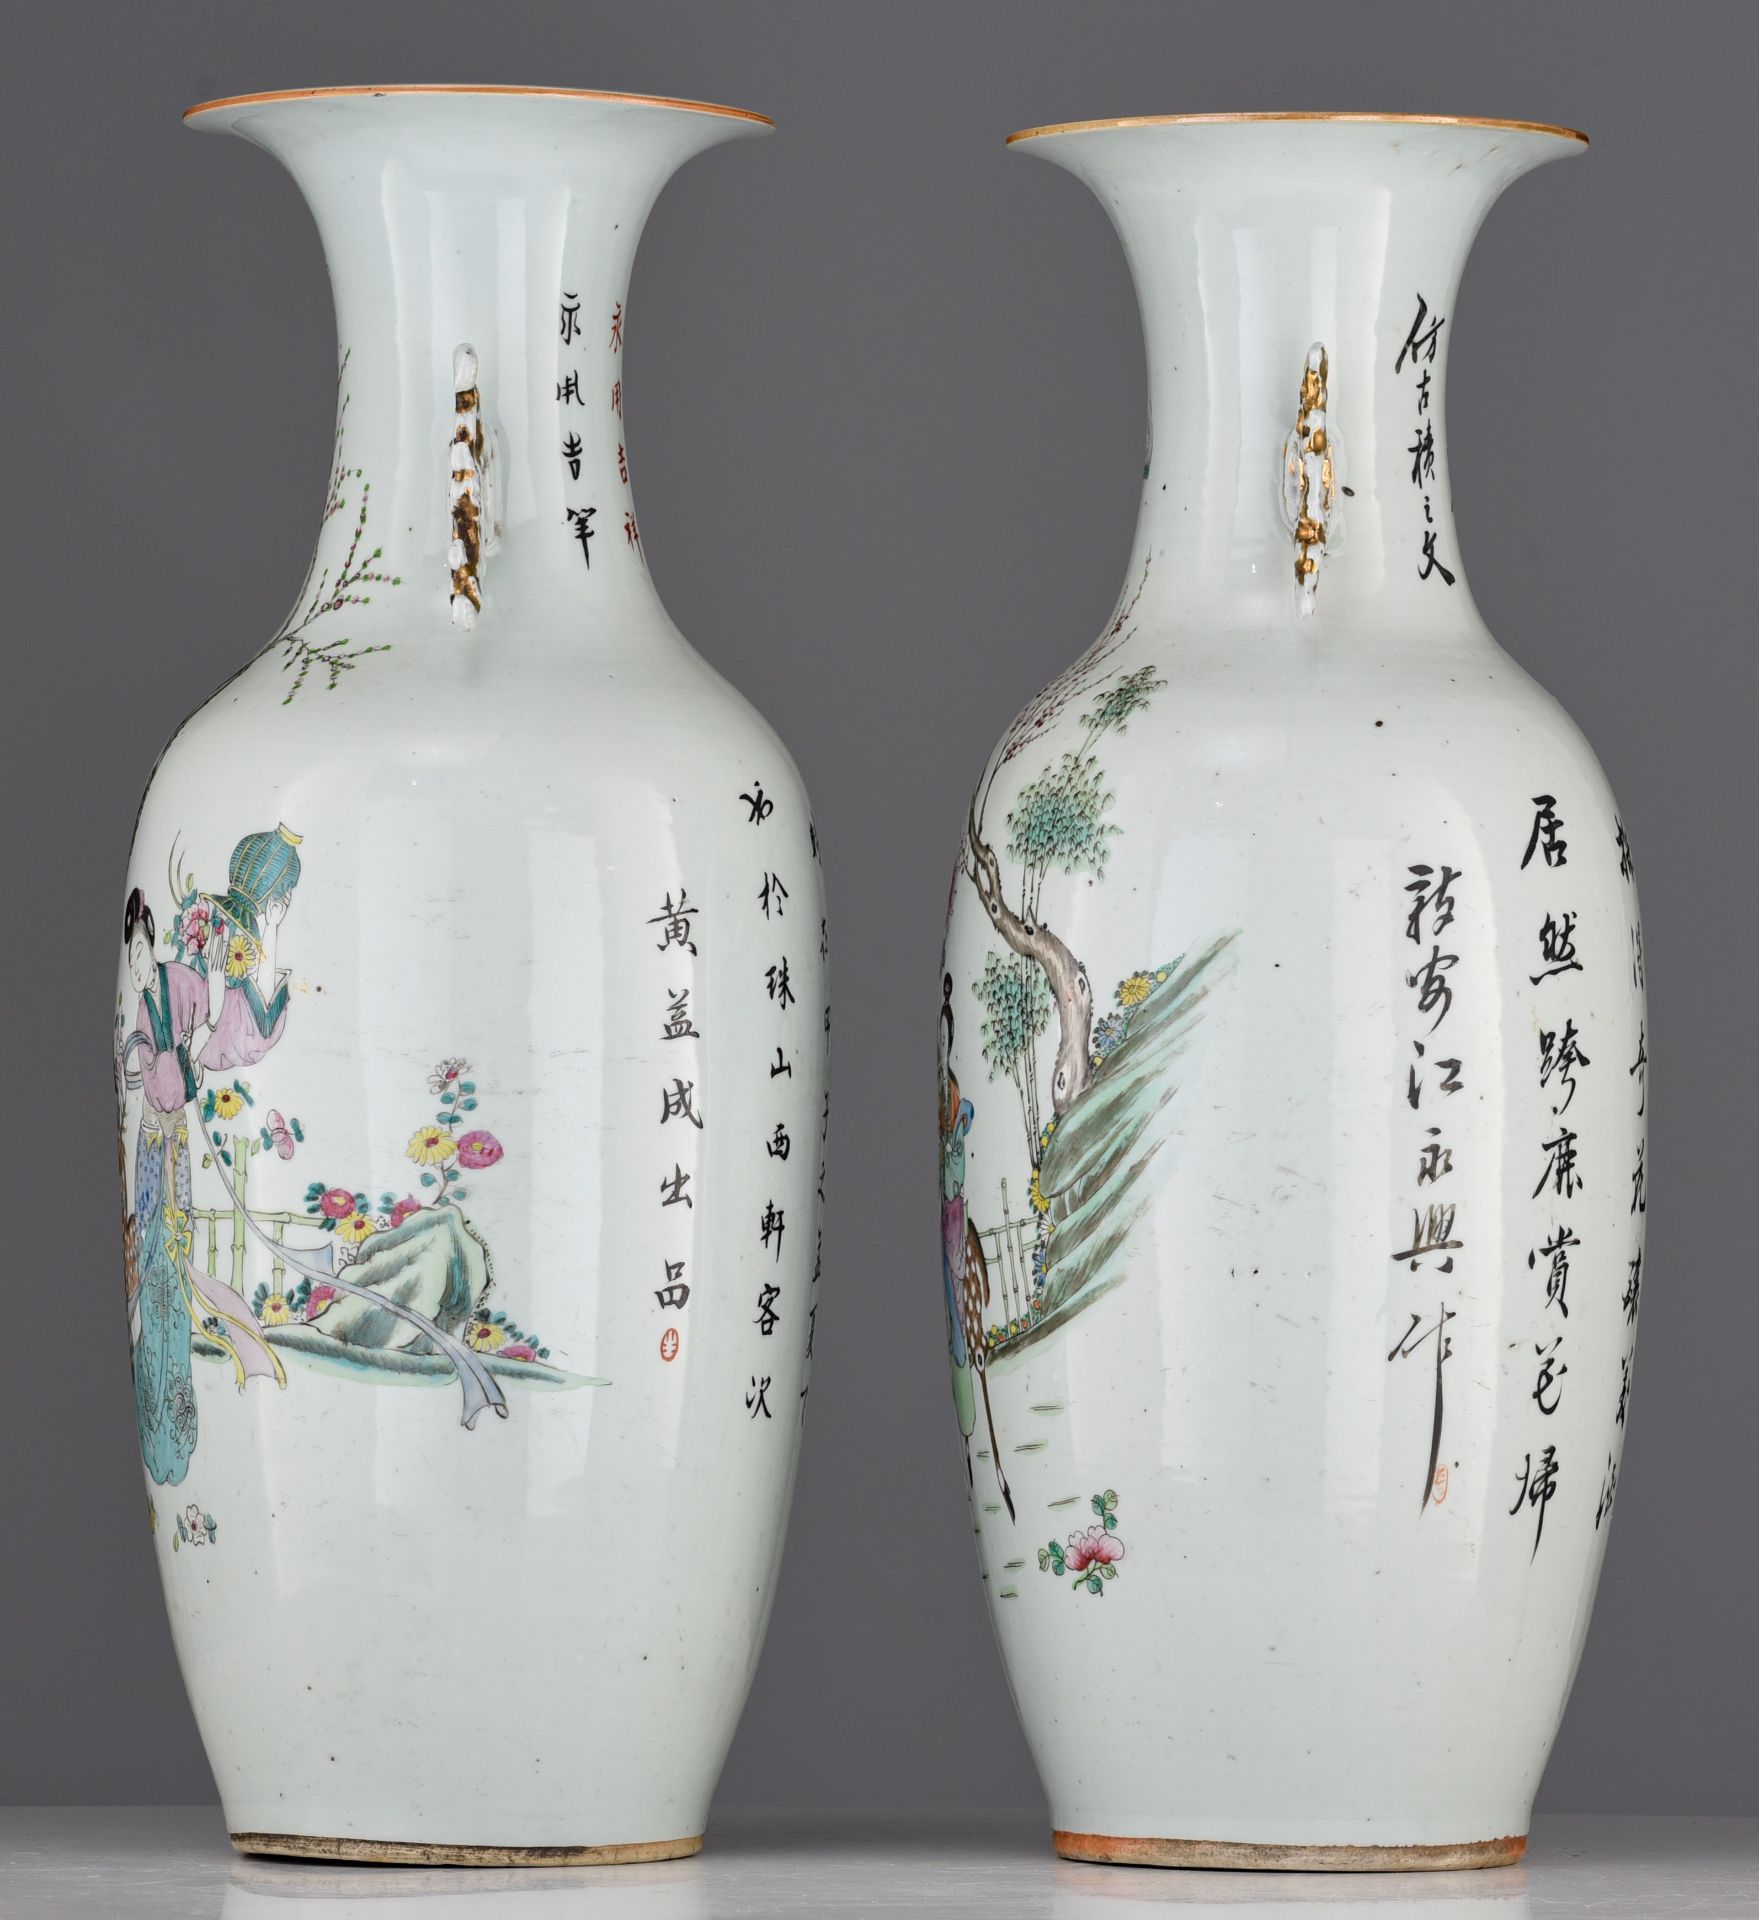 Two Chinese famille rose 'Magu and the deer' vases, the back with a signed text, Republic period H 5 - Image 3 of 7